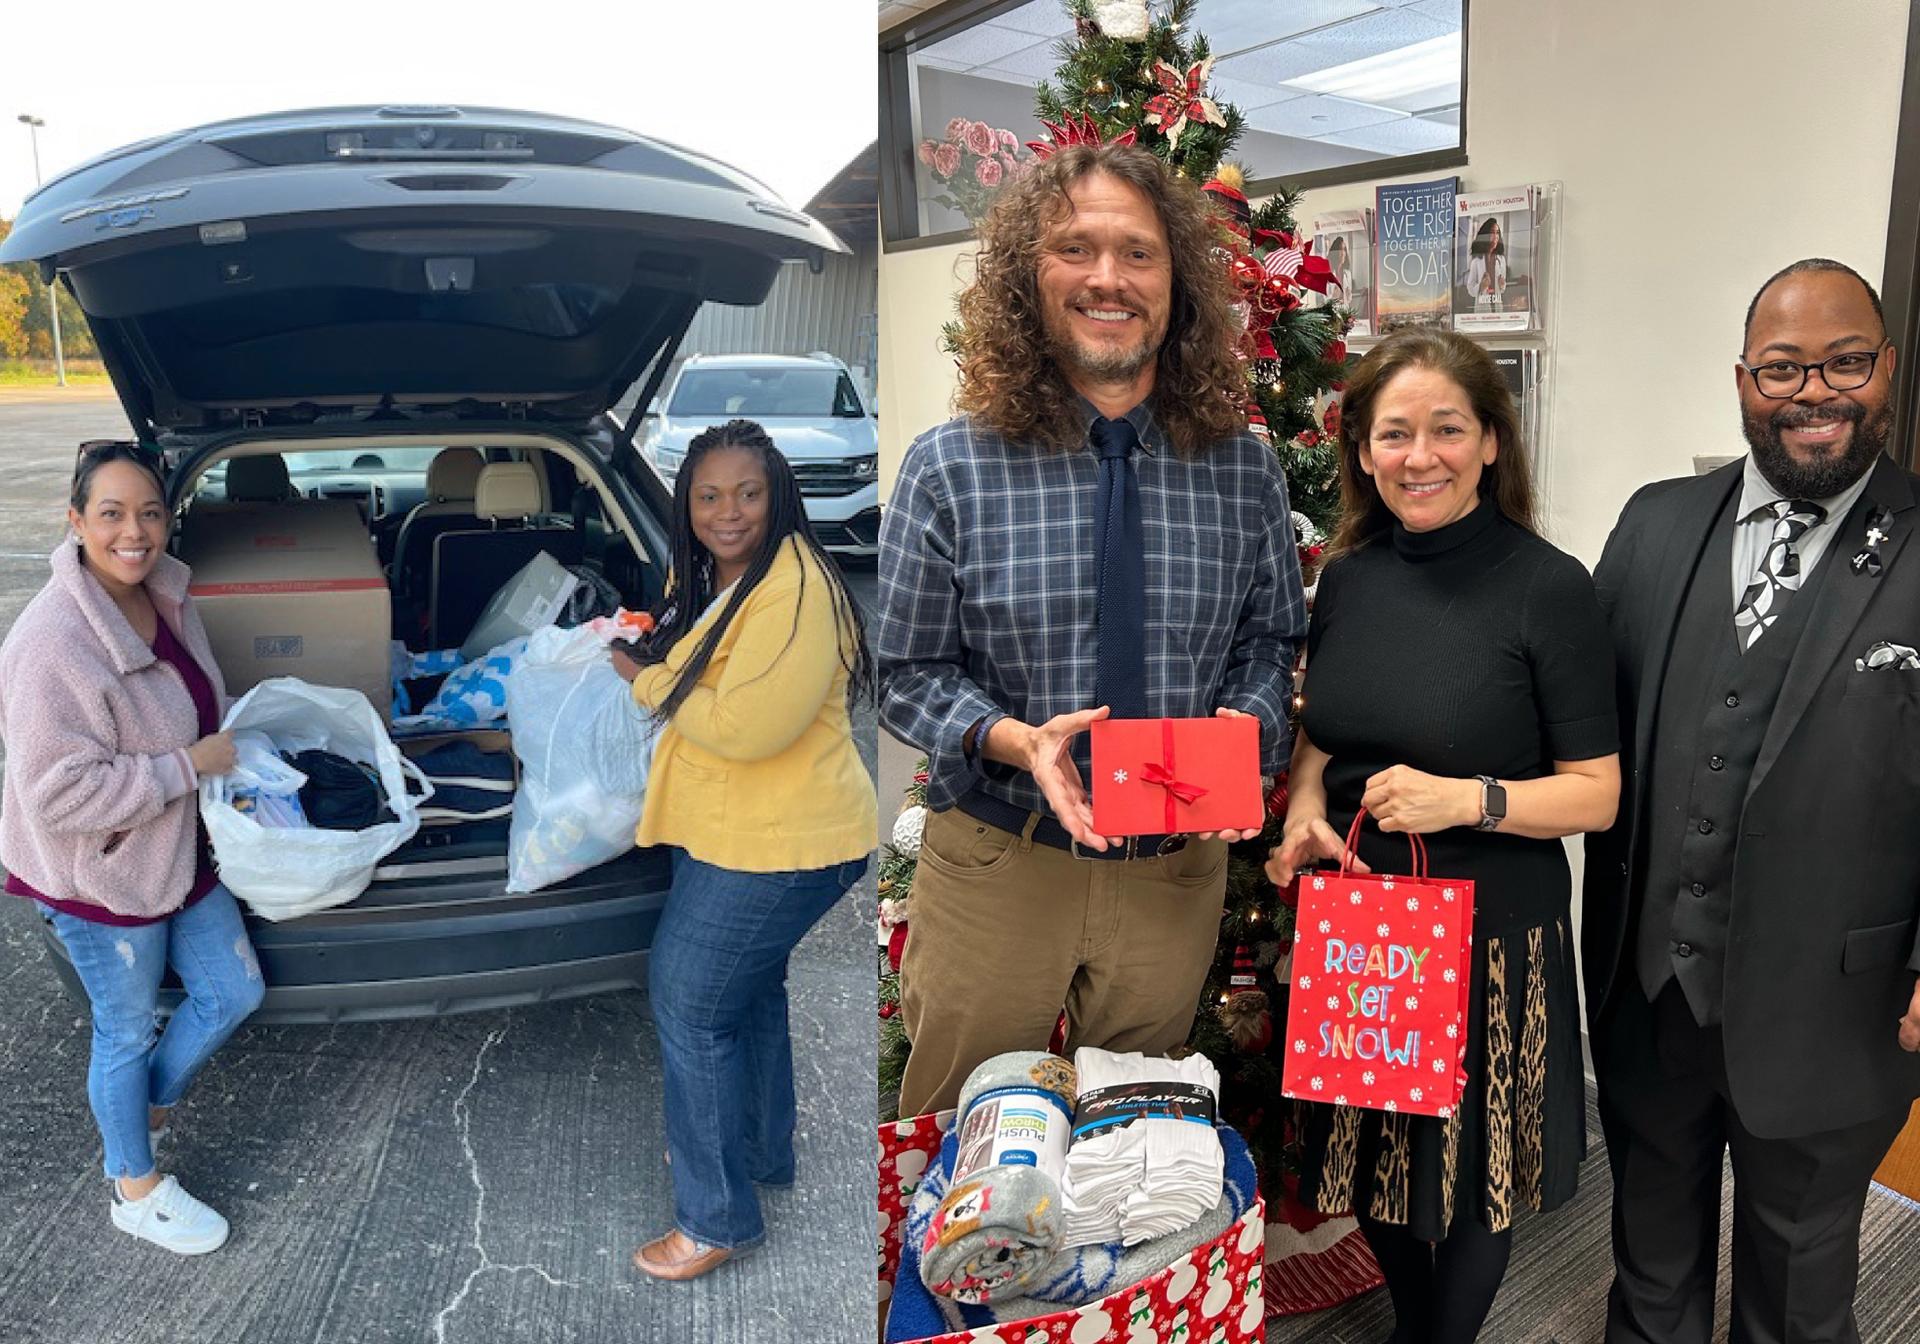 Two images, one of two women filling the back of a car with bags and boxes on the left, and on the right, three UH employees with donation items at a holiday party